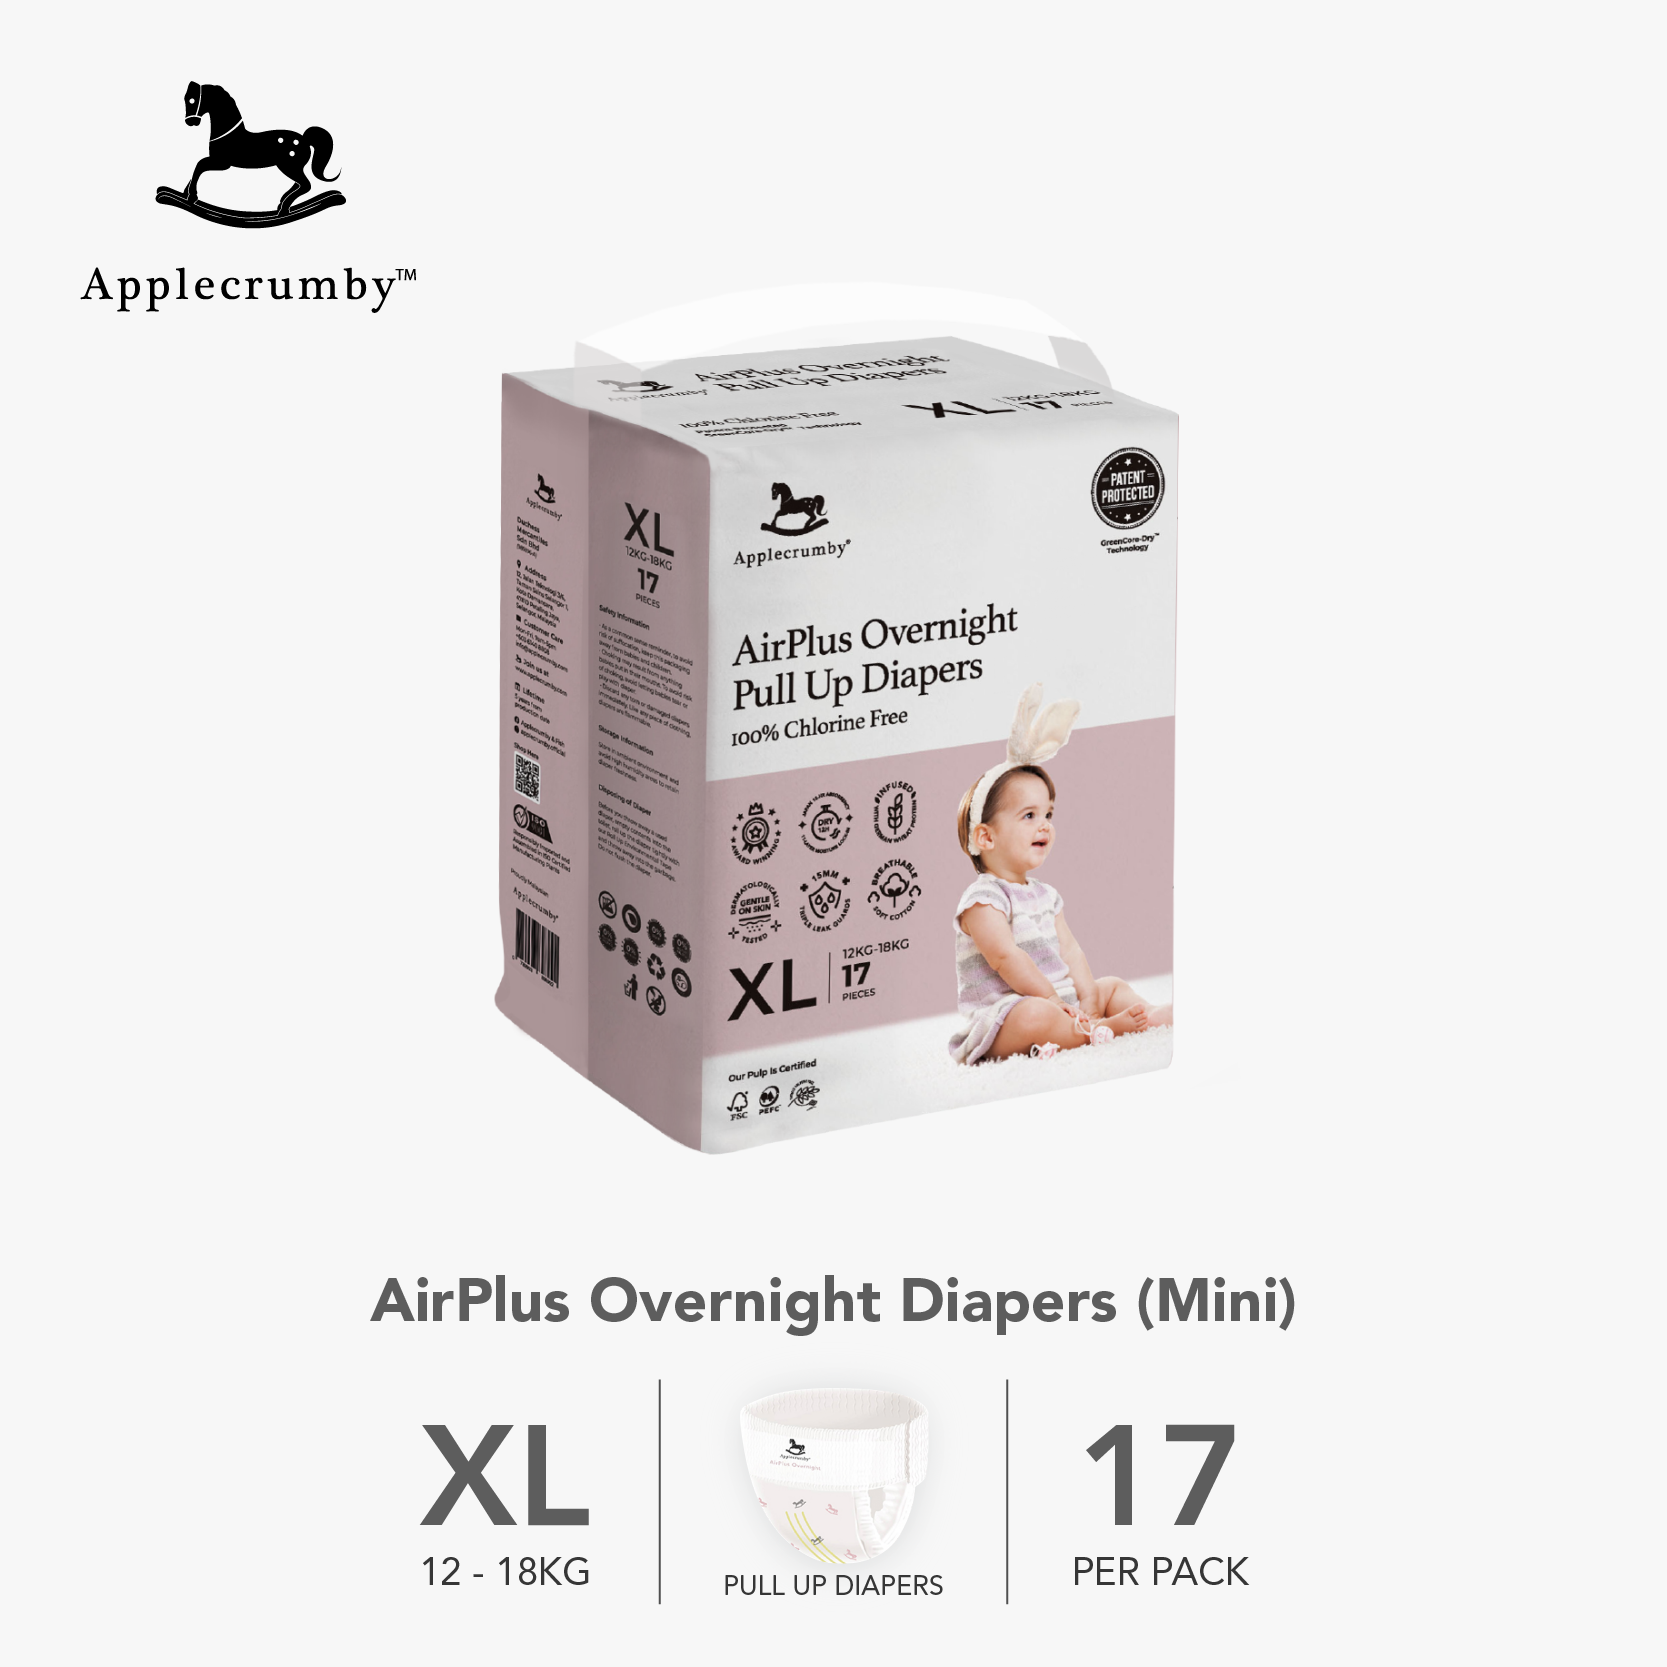 Applecrumby® AirPlus Overnight Pull Up Diapers XL 17 (Mini) - AstraFamily